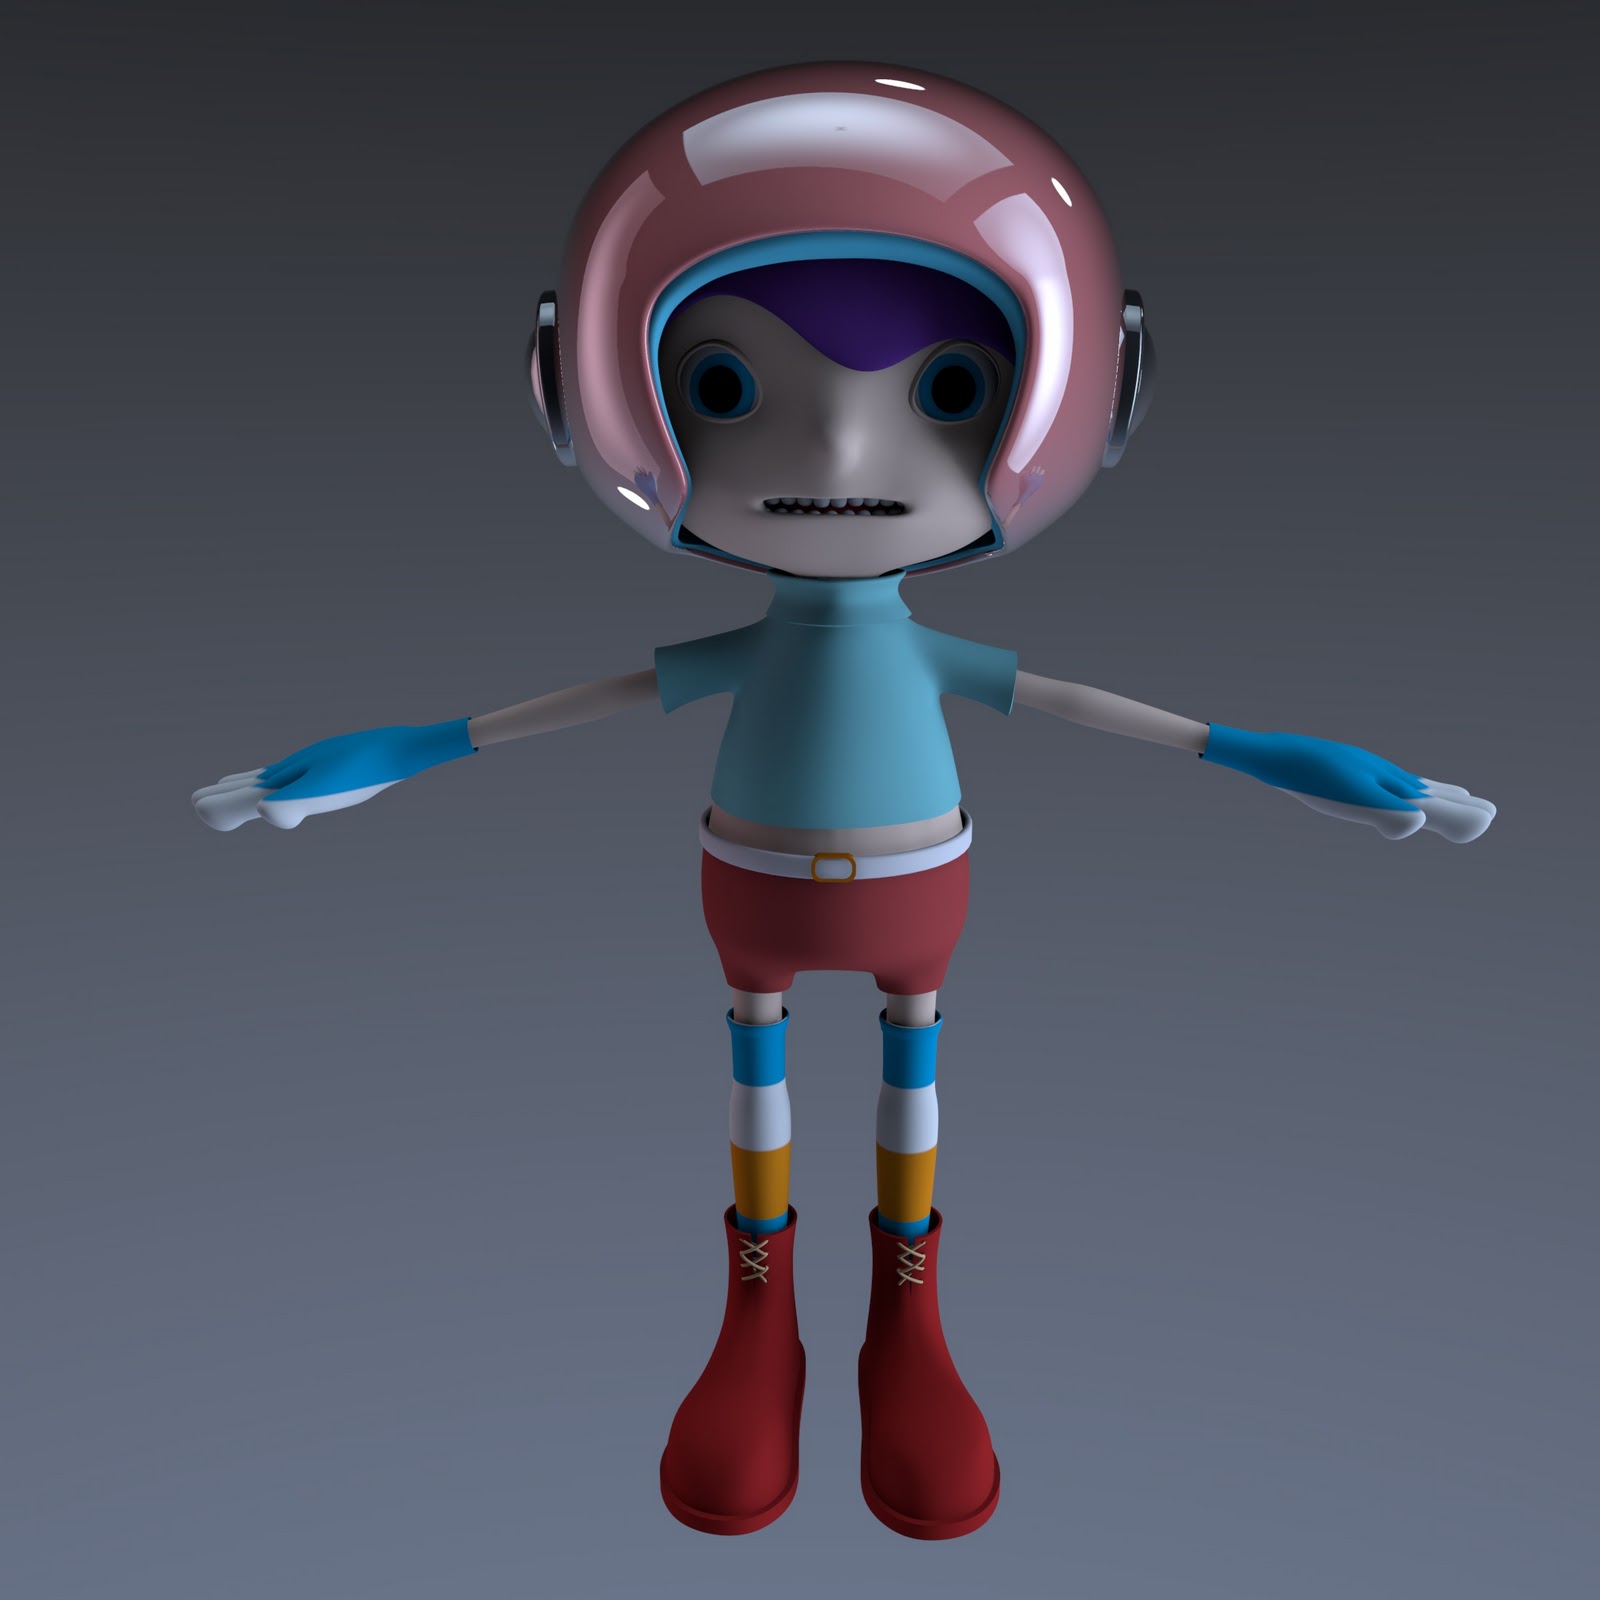 c4d character animation